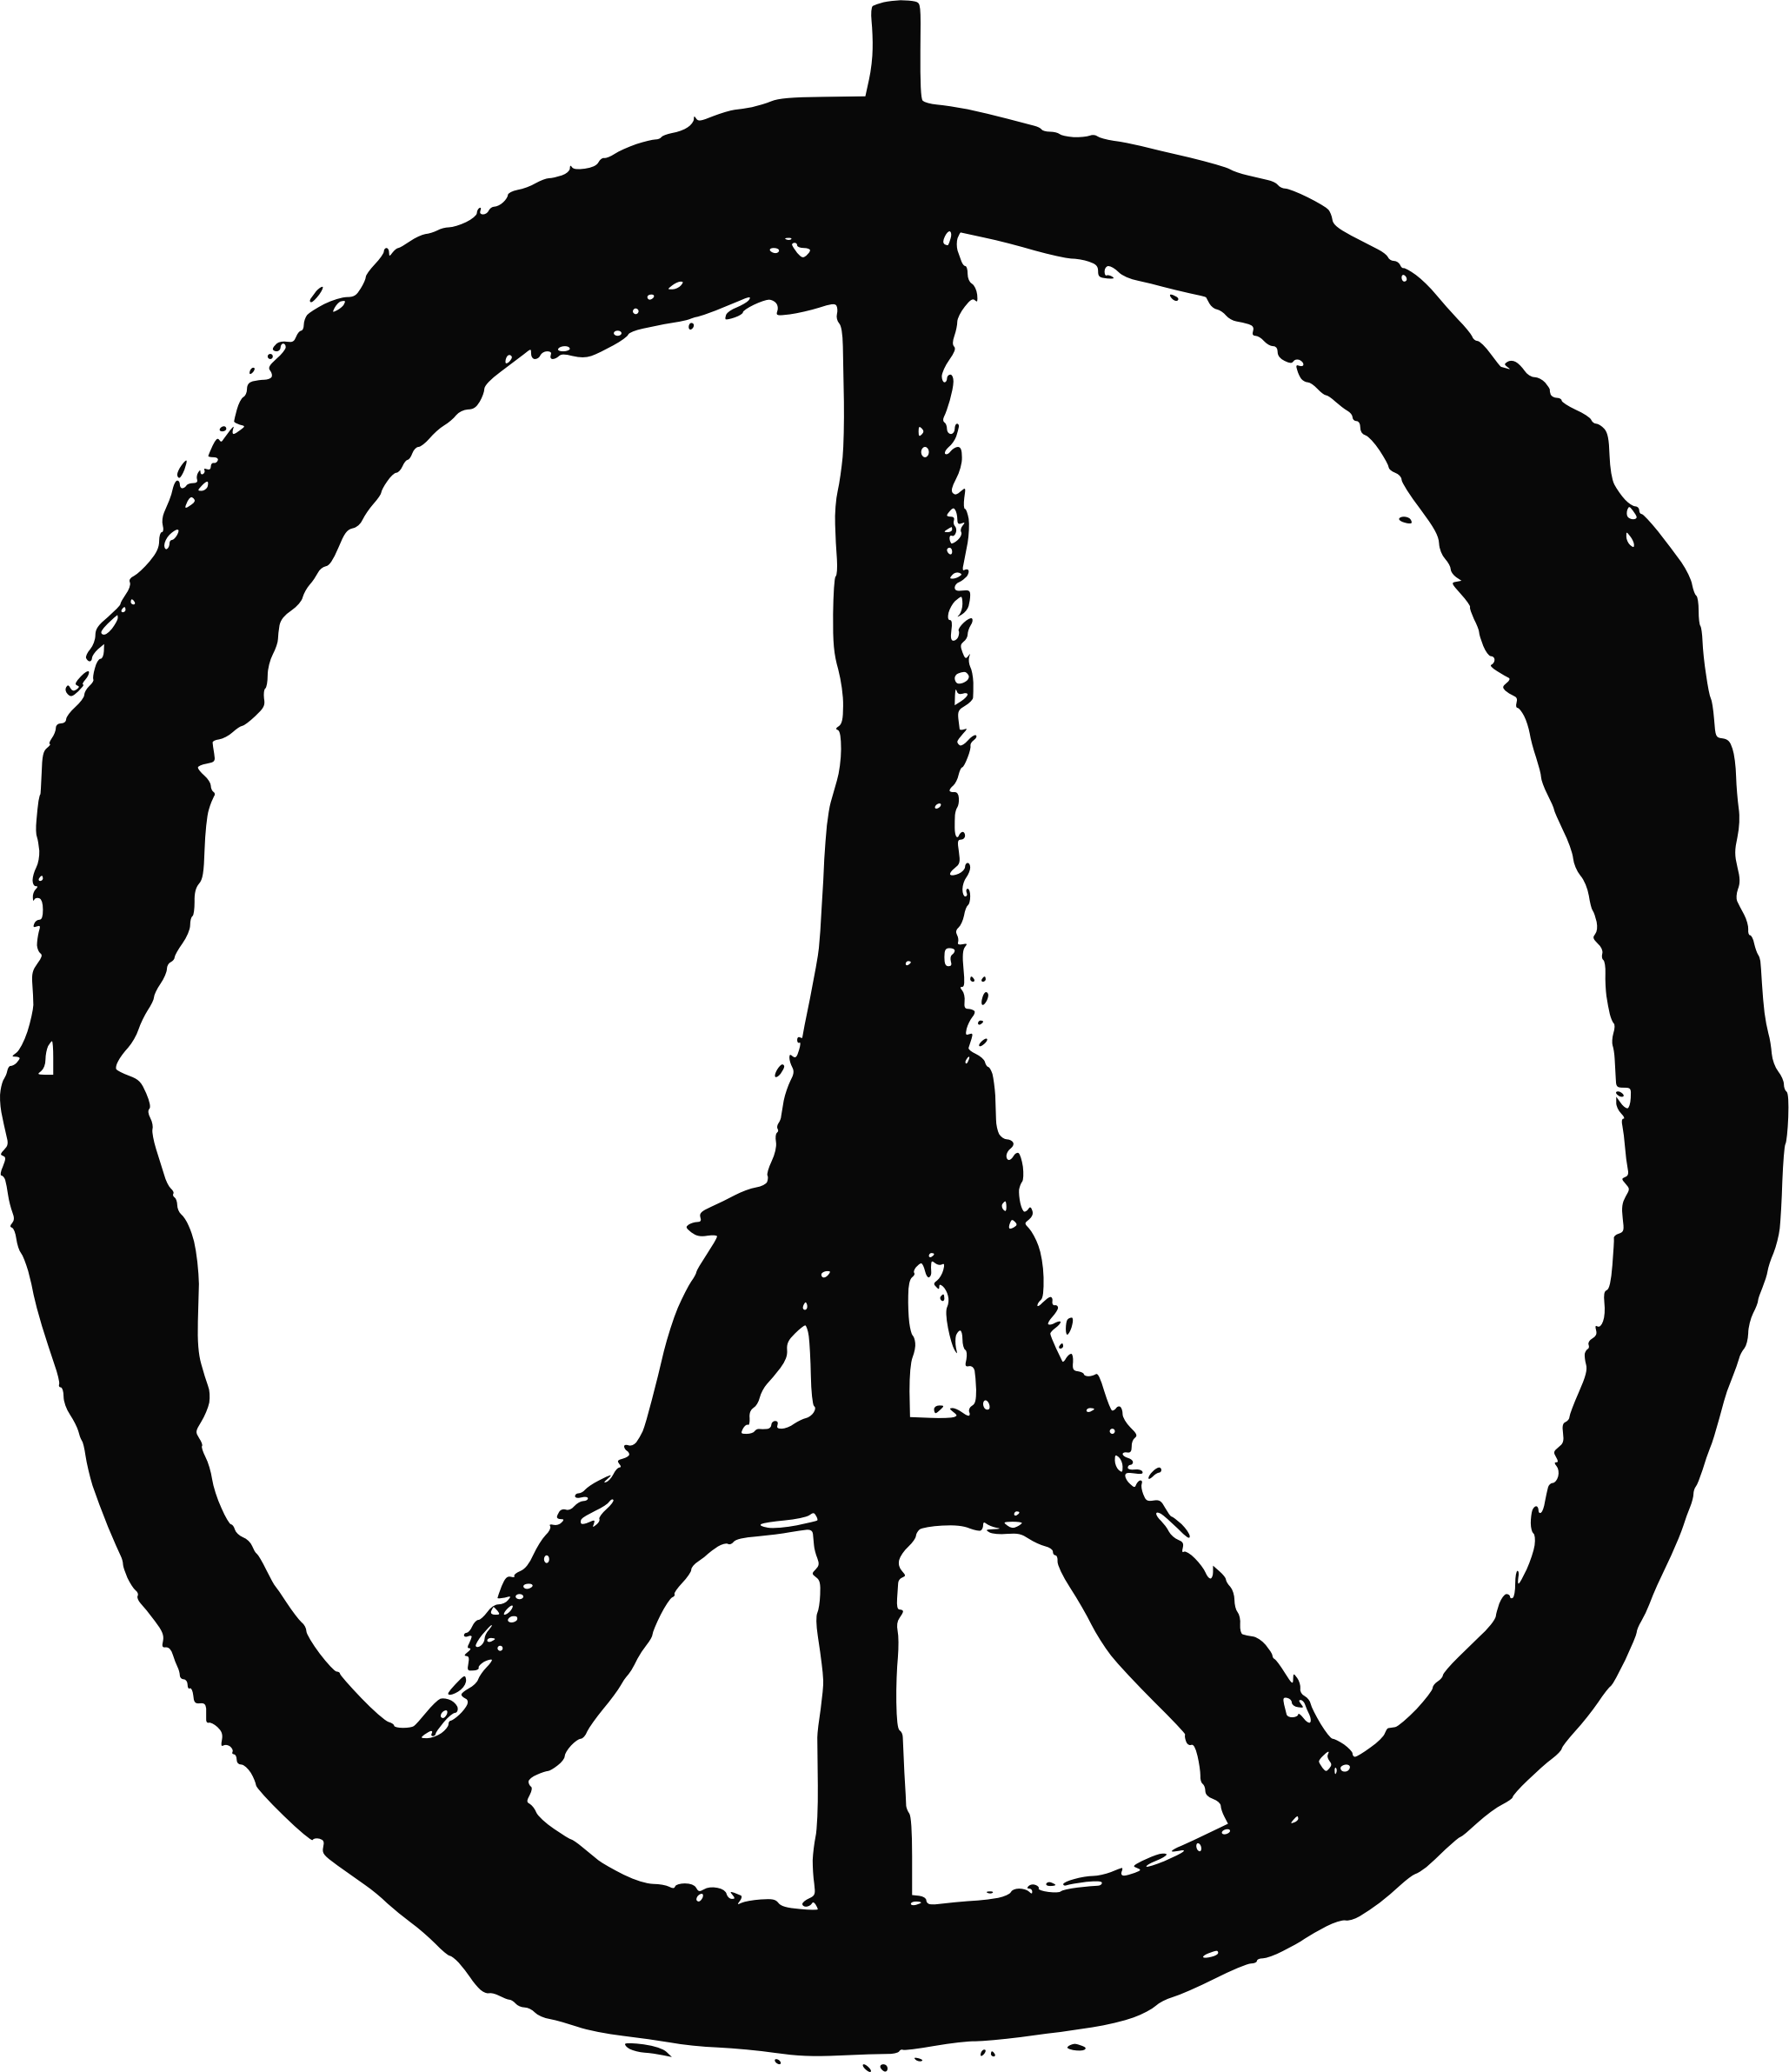 Graphic: "Pray for Paris": A peace sign, created by Jean Jullien in response to the Nov. 13, 2015 terrorist attacks in Paris, features the Eiffel Tower in Paris as the center. Image courtesy of Jean Jullien.